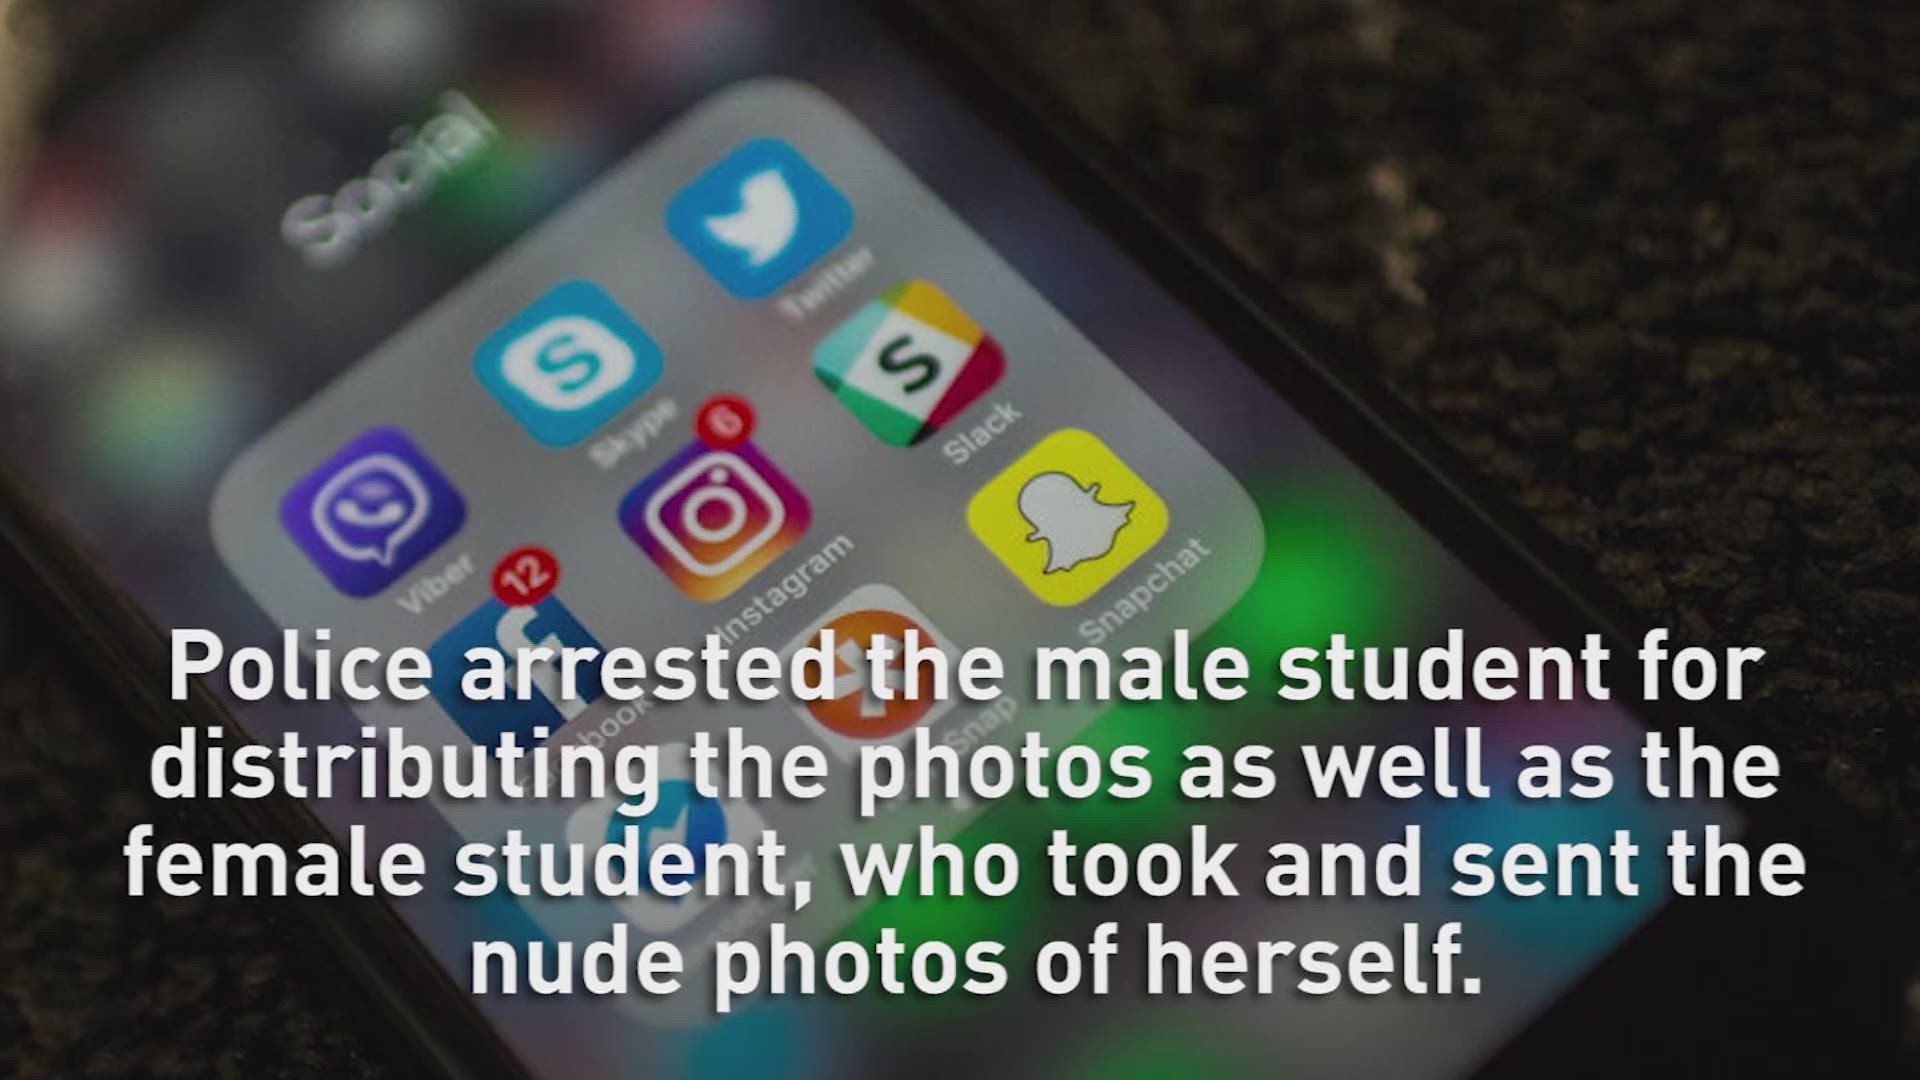 Police arrested the male student for distributing the photos as well as the female student, who took and sent the nude photos of herself.